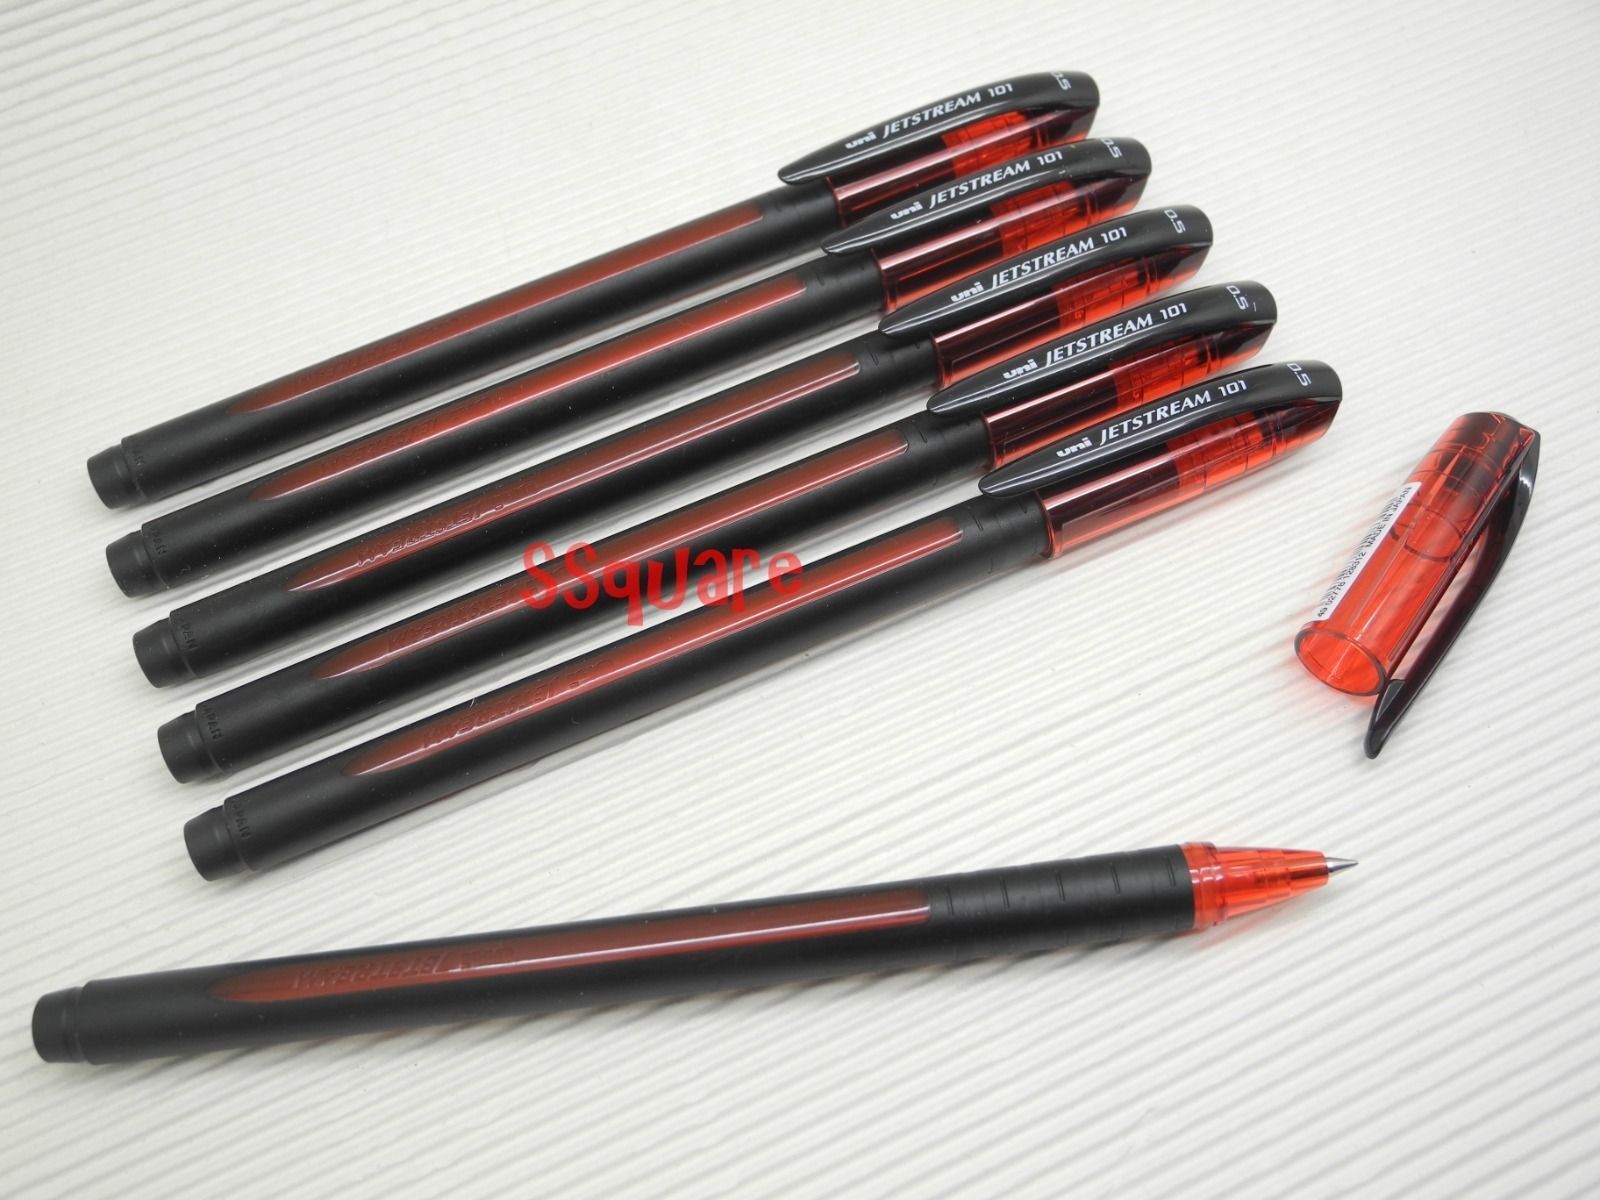 6 x Uni-Ball Jetstream SX-101 0.5mm Quick Drying Super Ink Rollerball Pens, Red